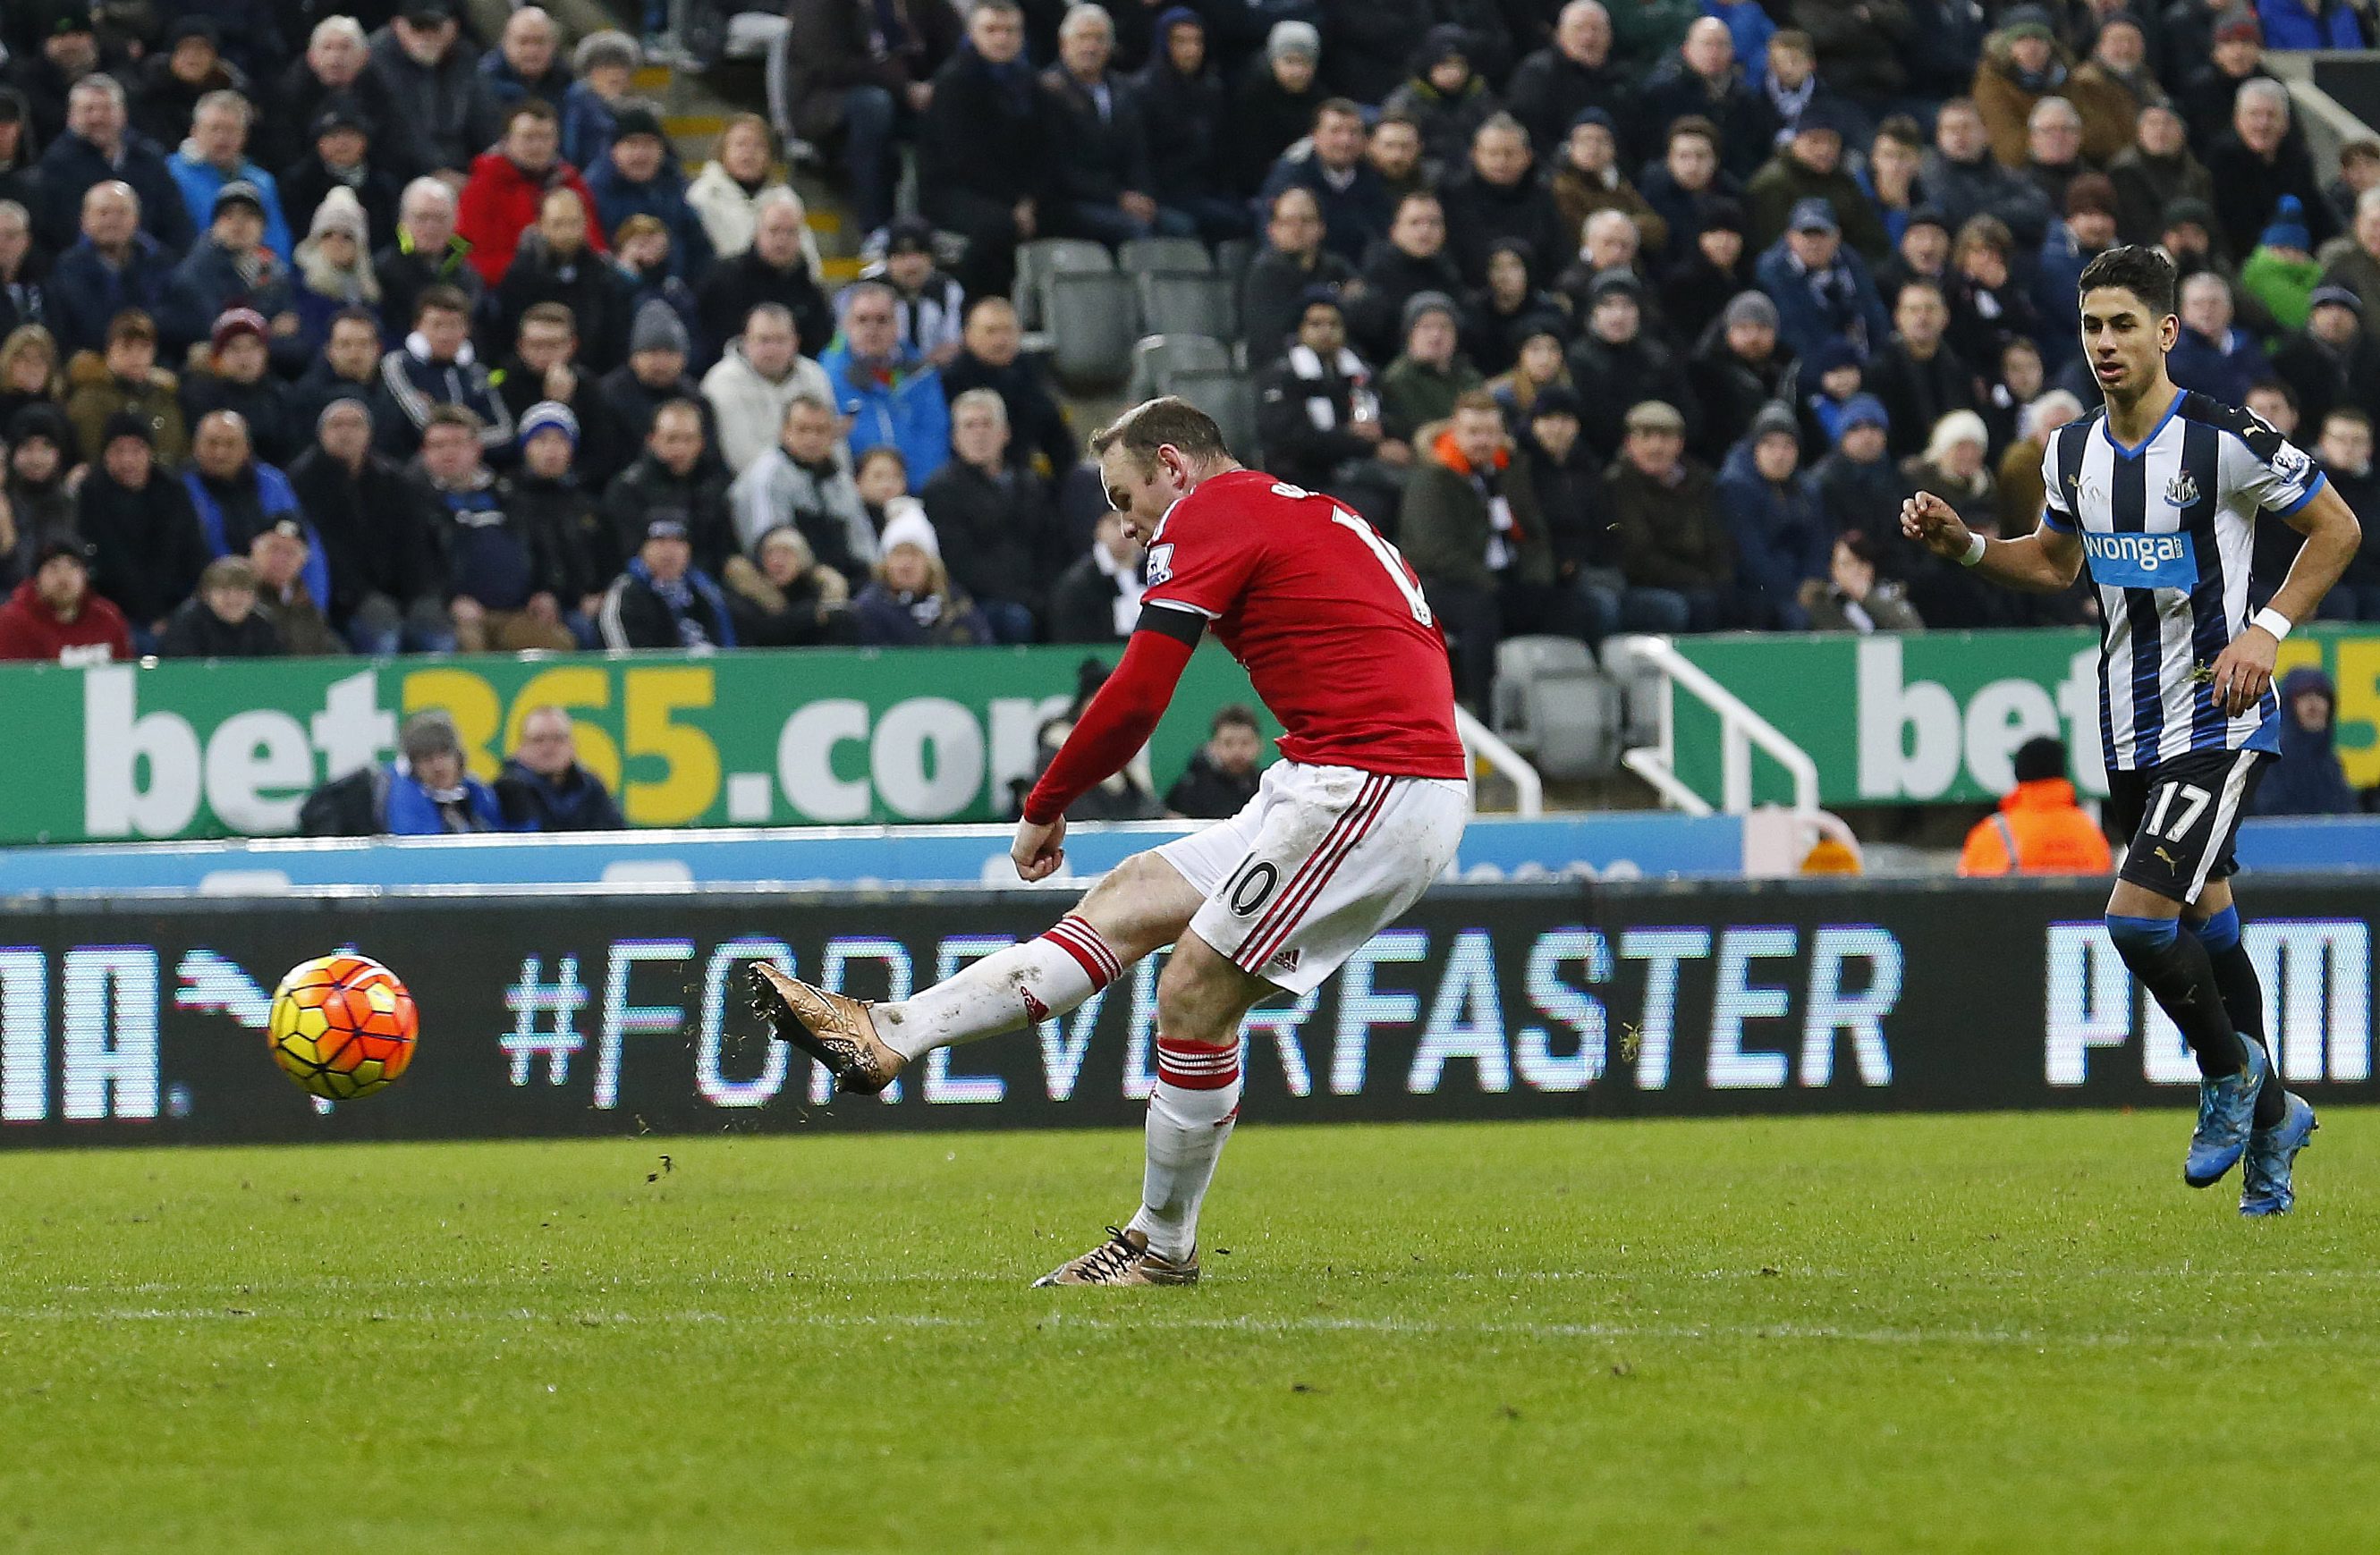 Record beckons Rooney? (Picture Courtesy - AFP/Getty Images)